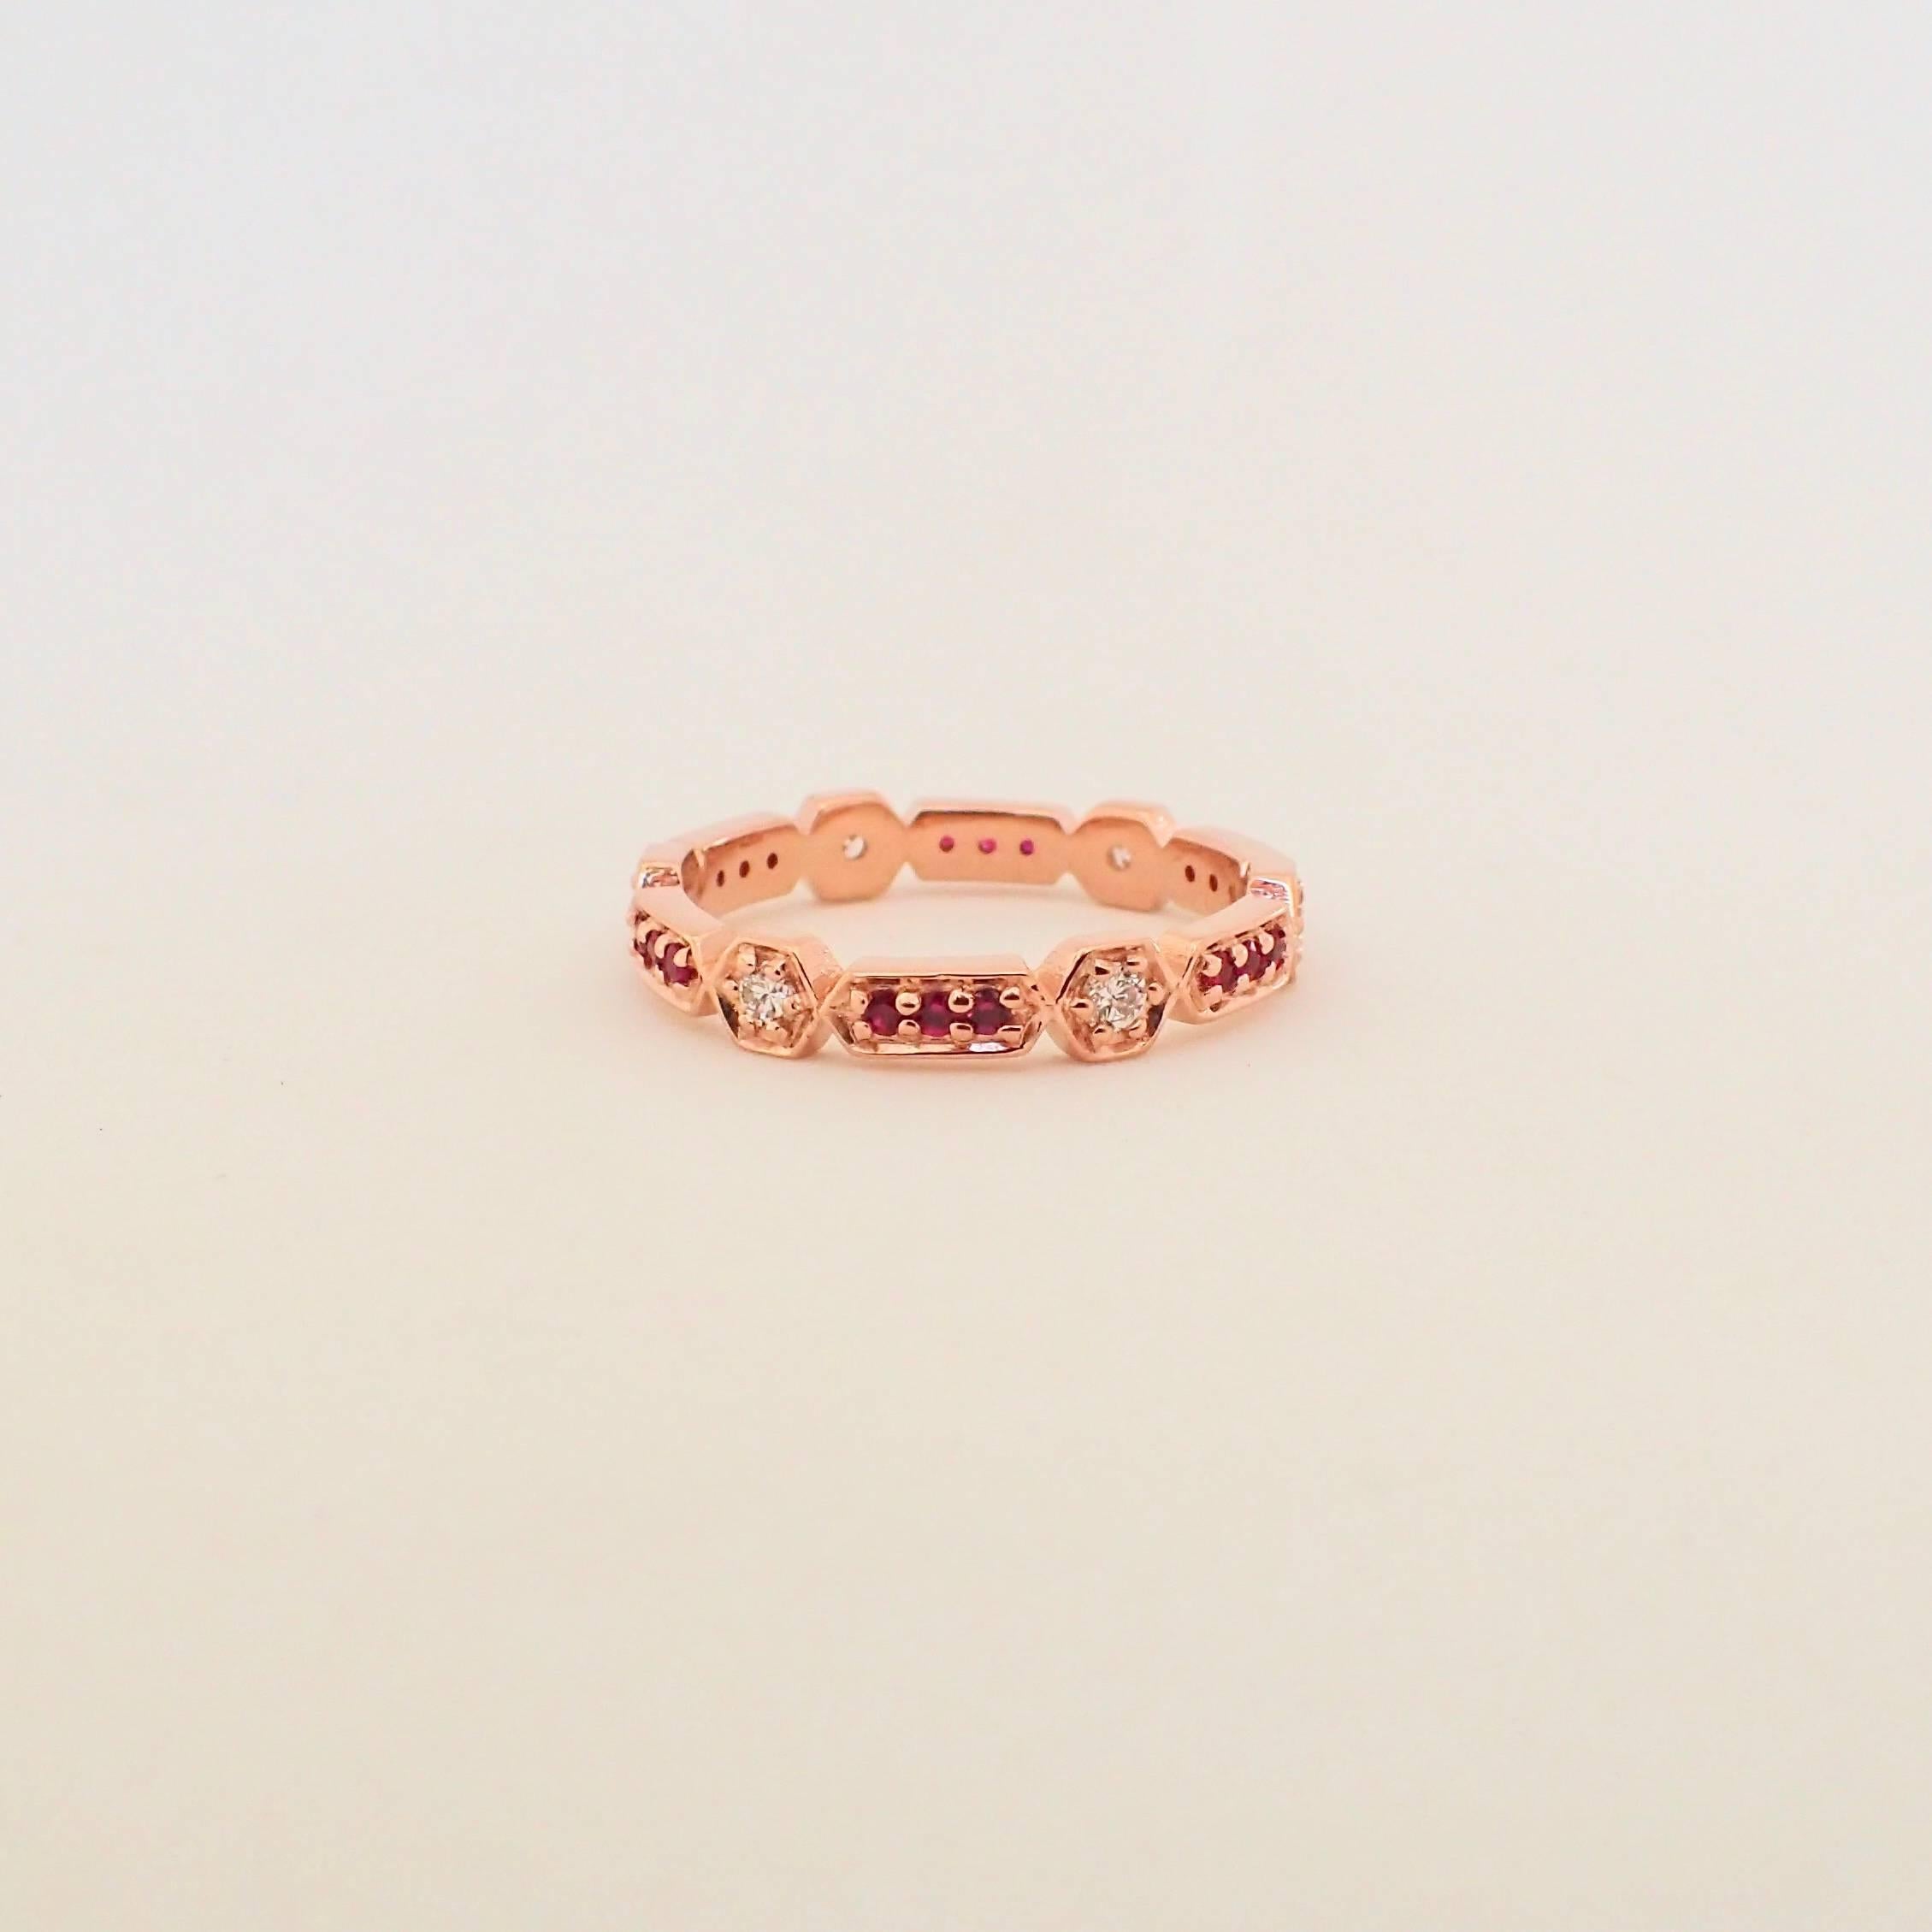 Contemporary 18 Karat Gold Eternity Band with 0.19 Carat of Diamond and 0.20 Carat of Ruby